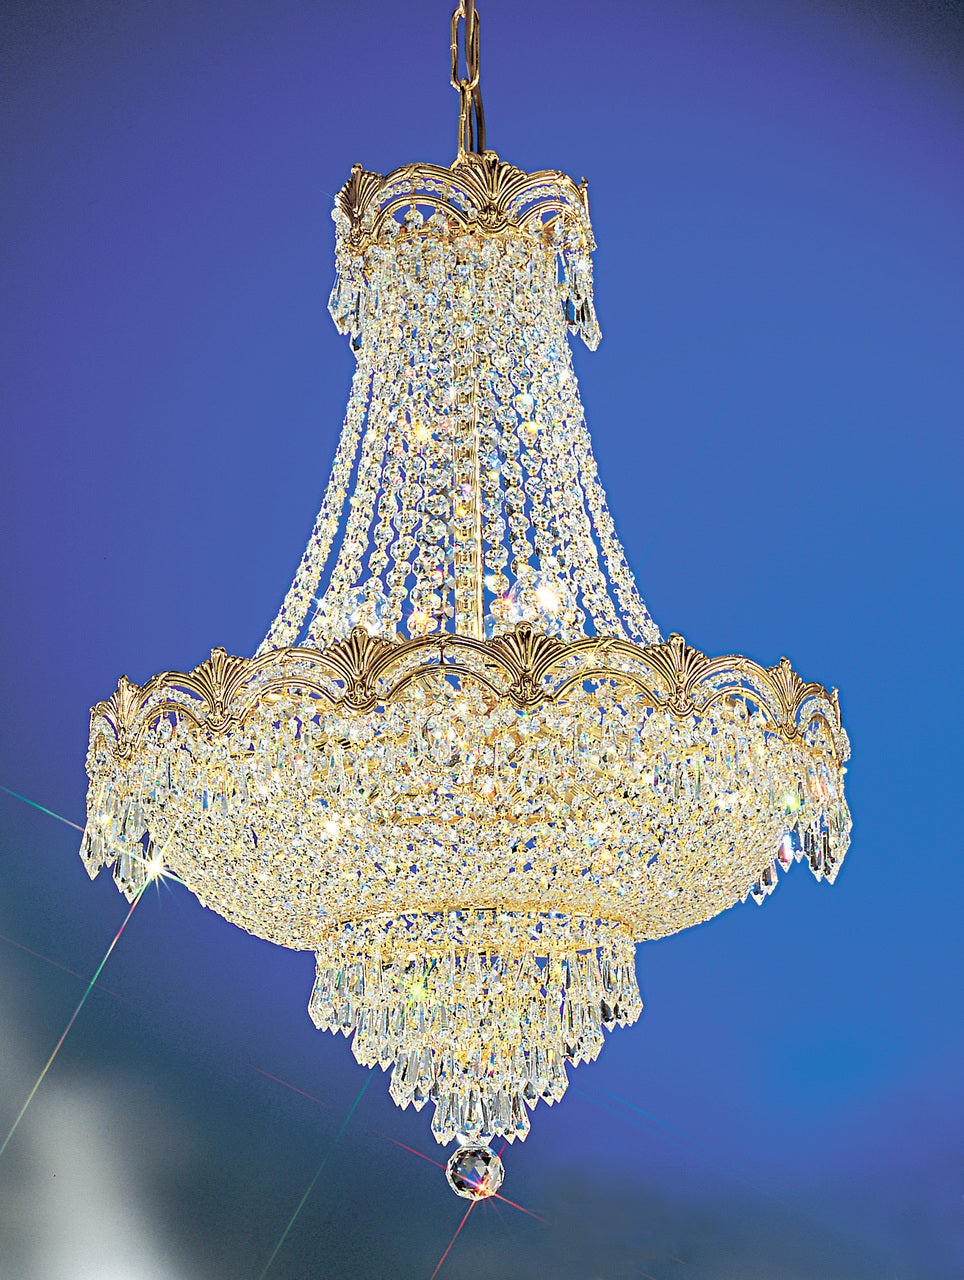 Classic Lighting 1855 G SGT Regency II Crystal Chandelier in 24k Gold (Imported from Spain)